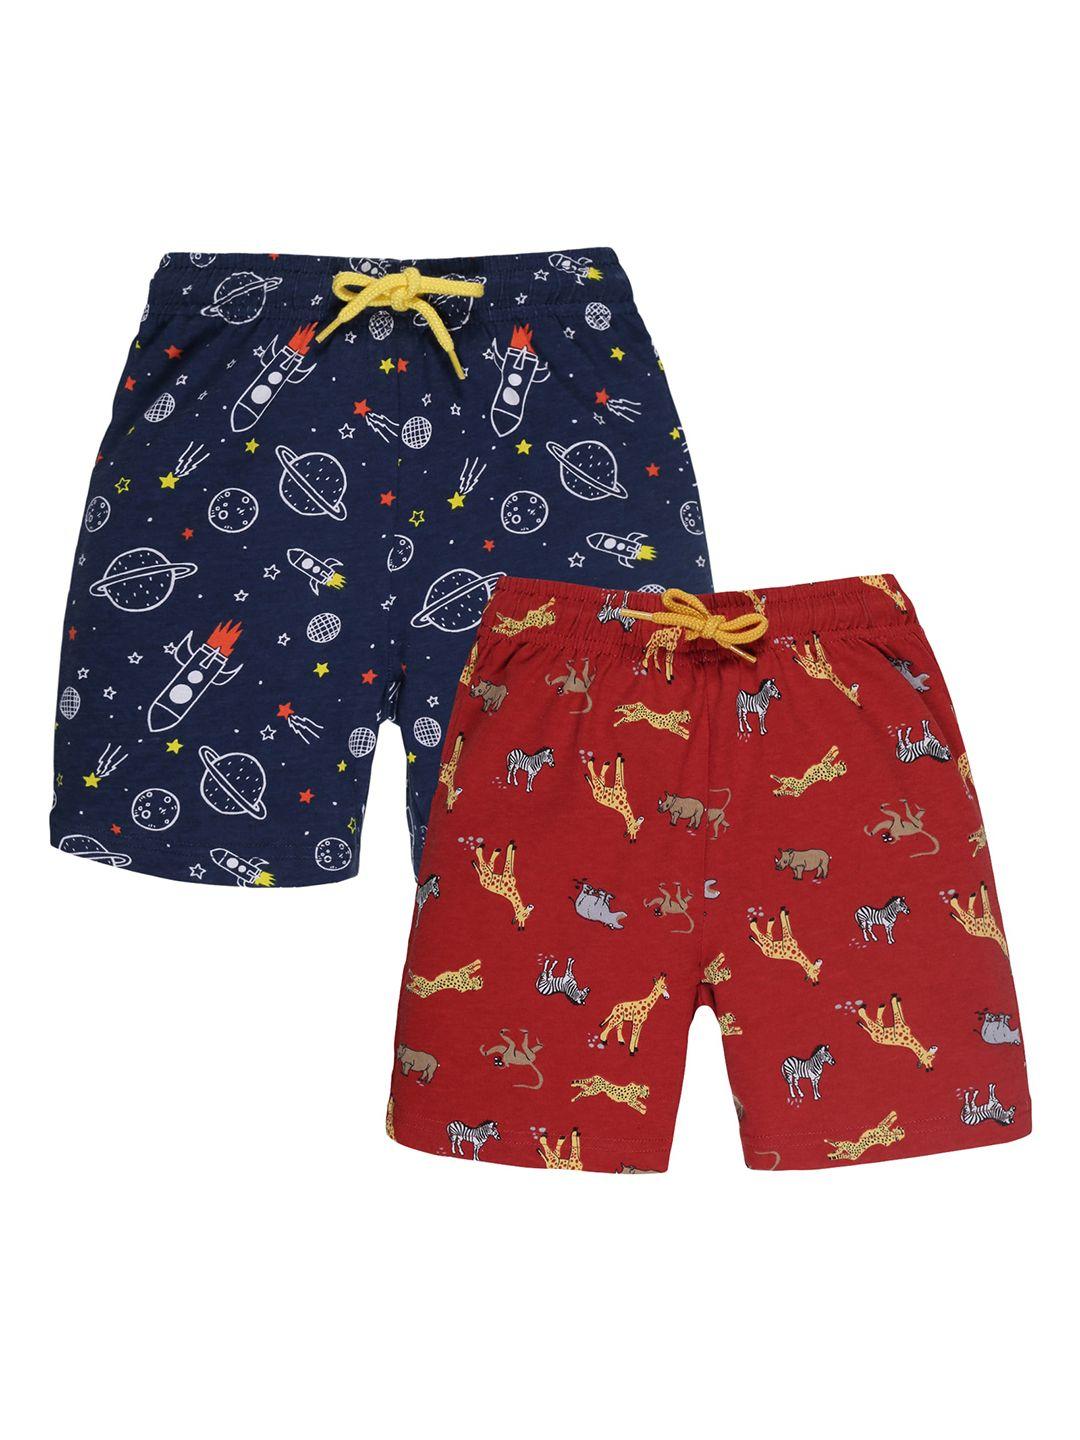 plum-tree-boys-pack-of-2-mid-rise-printed-casual-pure-cotton-shorts